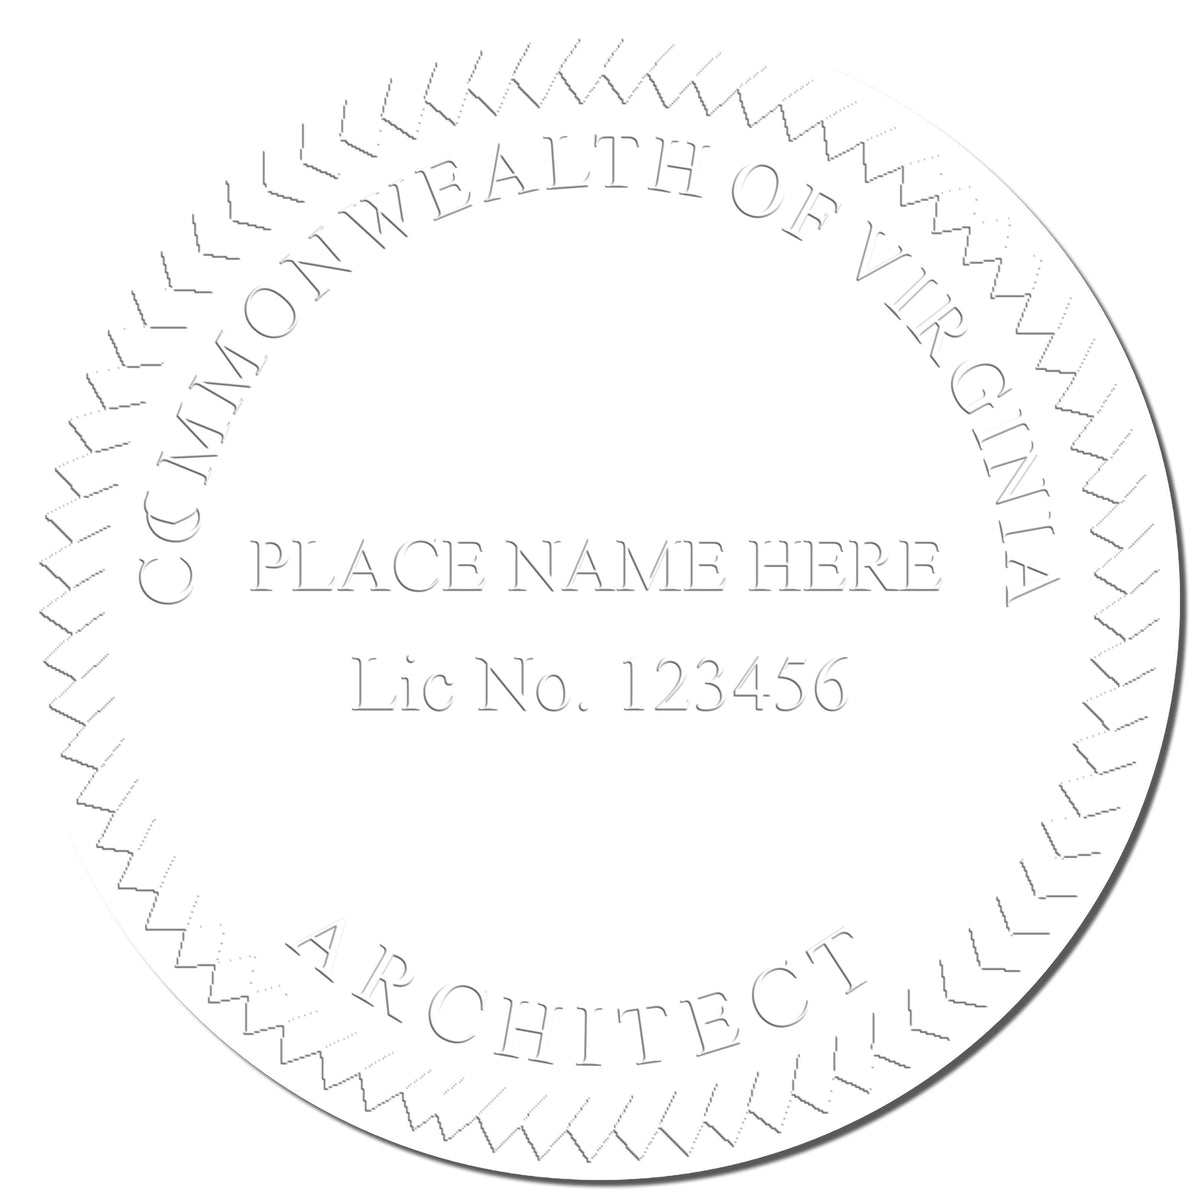 This paper is stamped with a sample imprint of the Hybrid Virginia Architect Seal, signifying its quality and reliability.